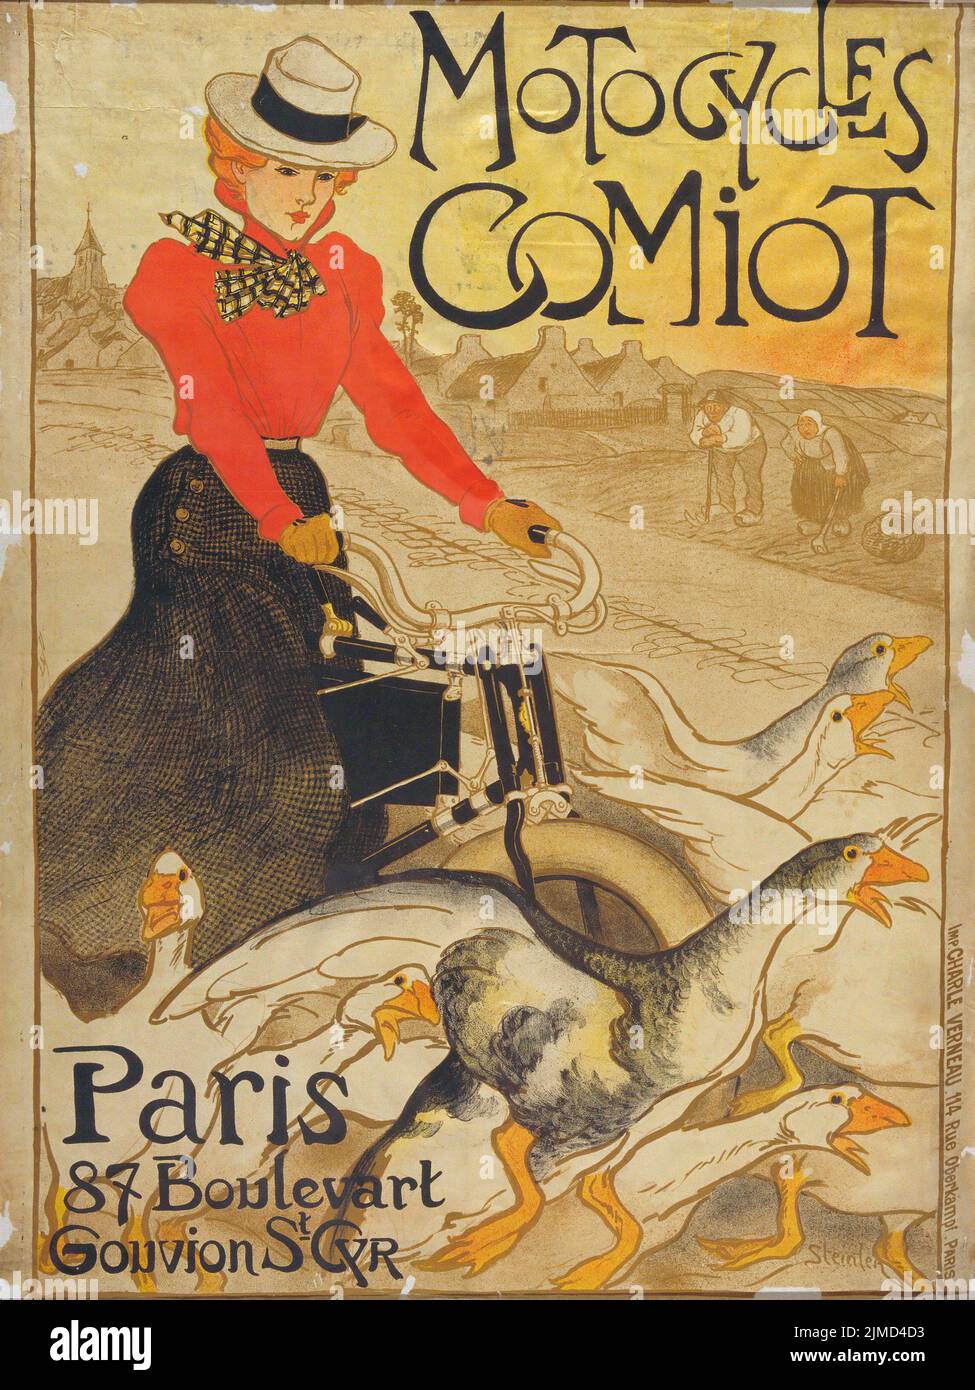 1899 French bicycle ad,  Motocycles Comiot. Illustration by Théophile Alexandre Steinlen Stock Photo